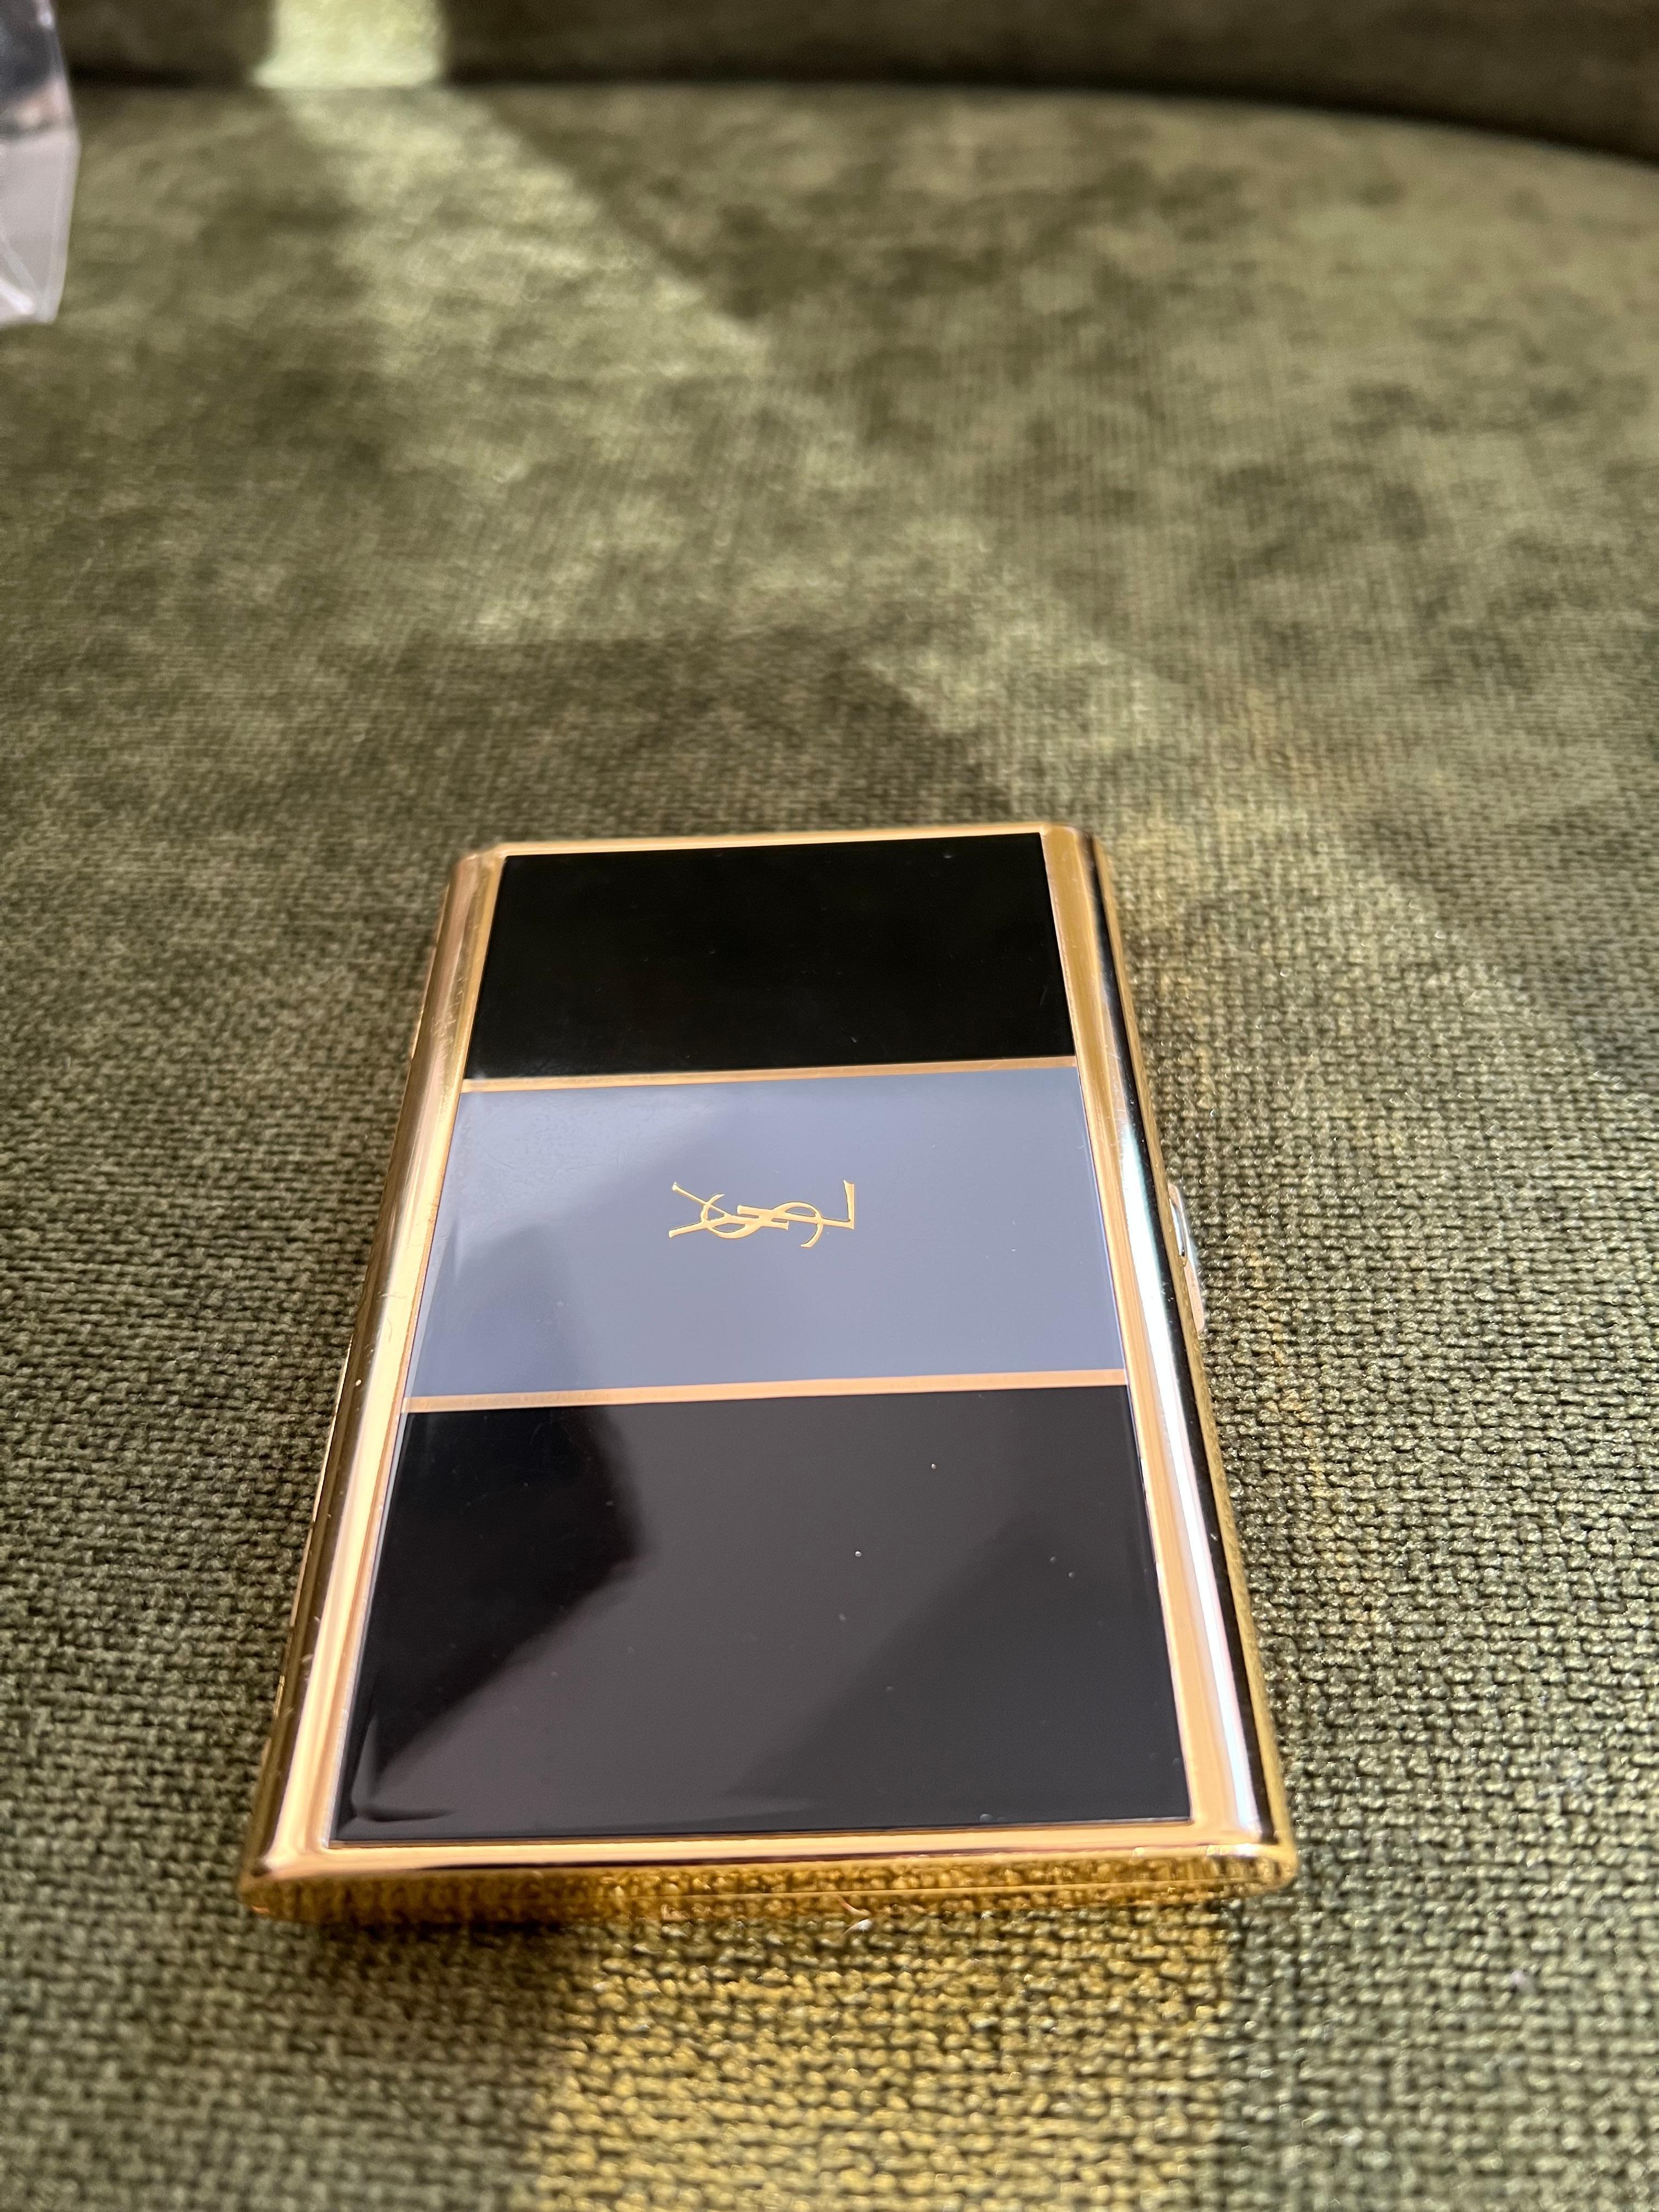 “YSL” Yves Saint Laurent Gold Plated Retro Cigarette Case In Excellent Condition For Sale In New York, NY